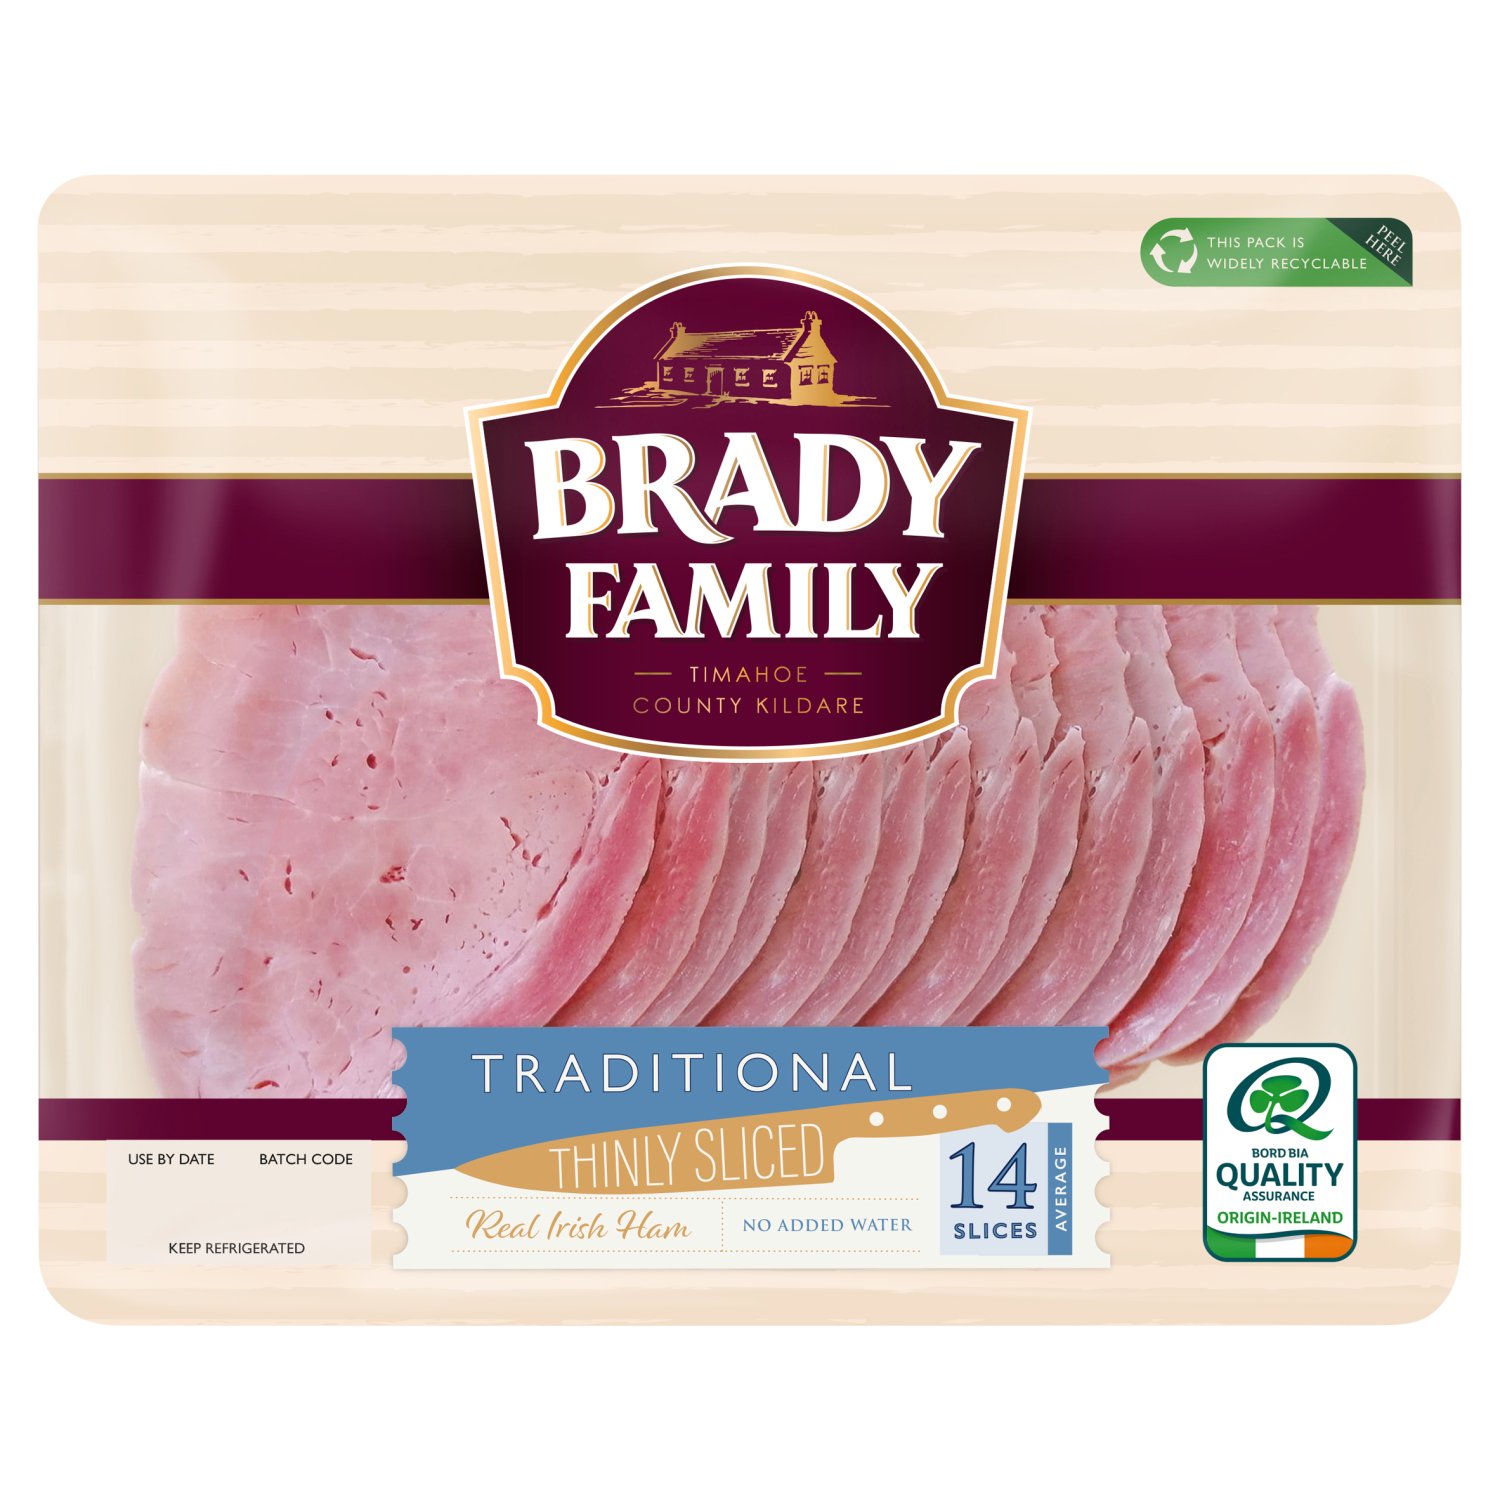 The Brady Family Tradition
Our 3 day curing method allows the ham to slowly mature, giving it a more delicate and distinctive flavour. The ham is then steam cooked before being expertly finished by hand. So you are always left with the highest quality traditional ham. A tradition produced with passion here in Timahoe, Co. Kildare.